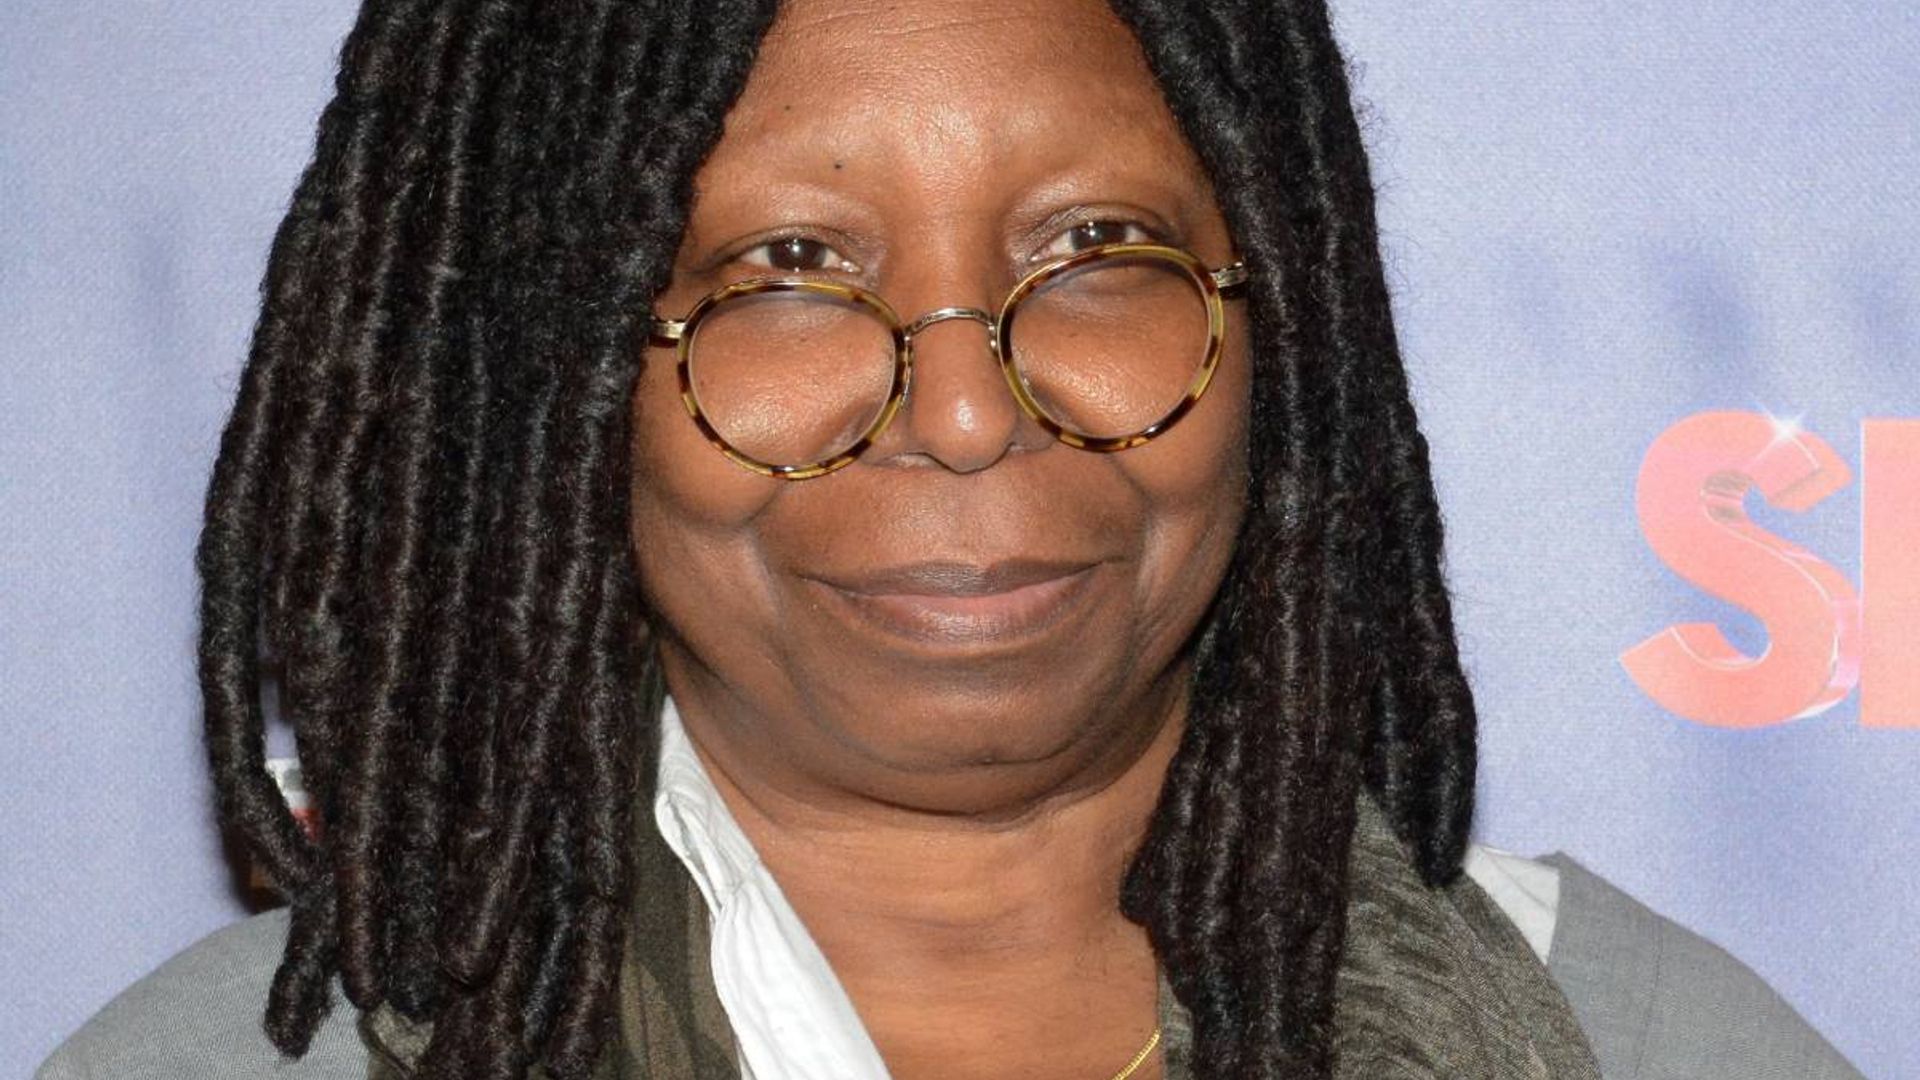 Whoopi Goldberb's The View co-star shares photo of the pair in show of support amid suspension